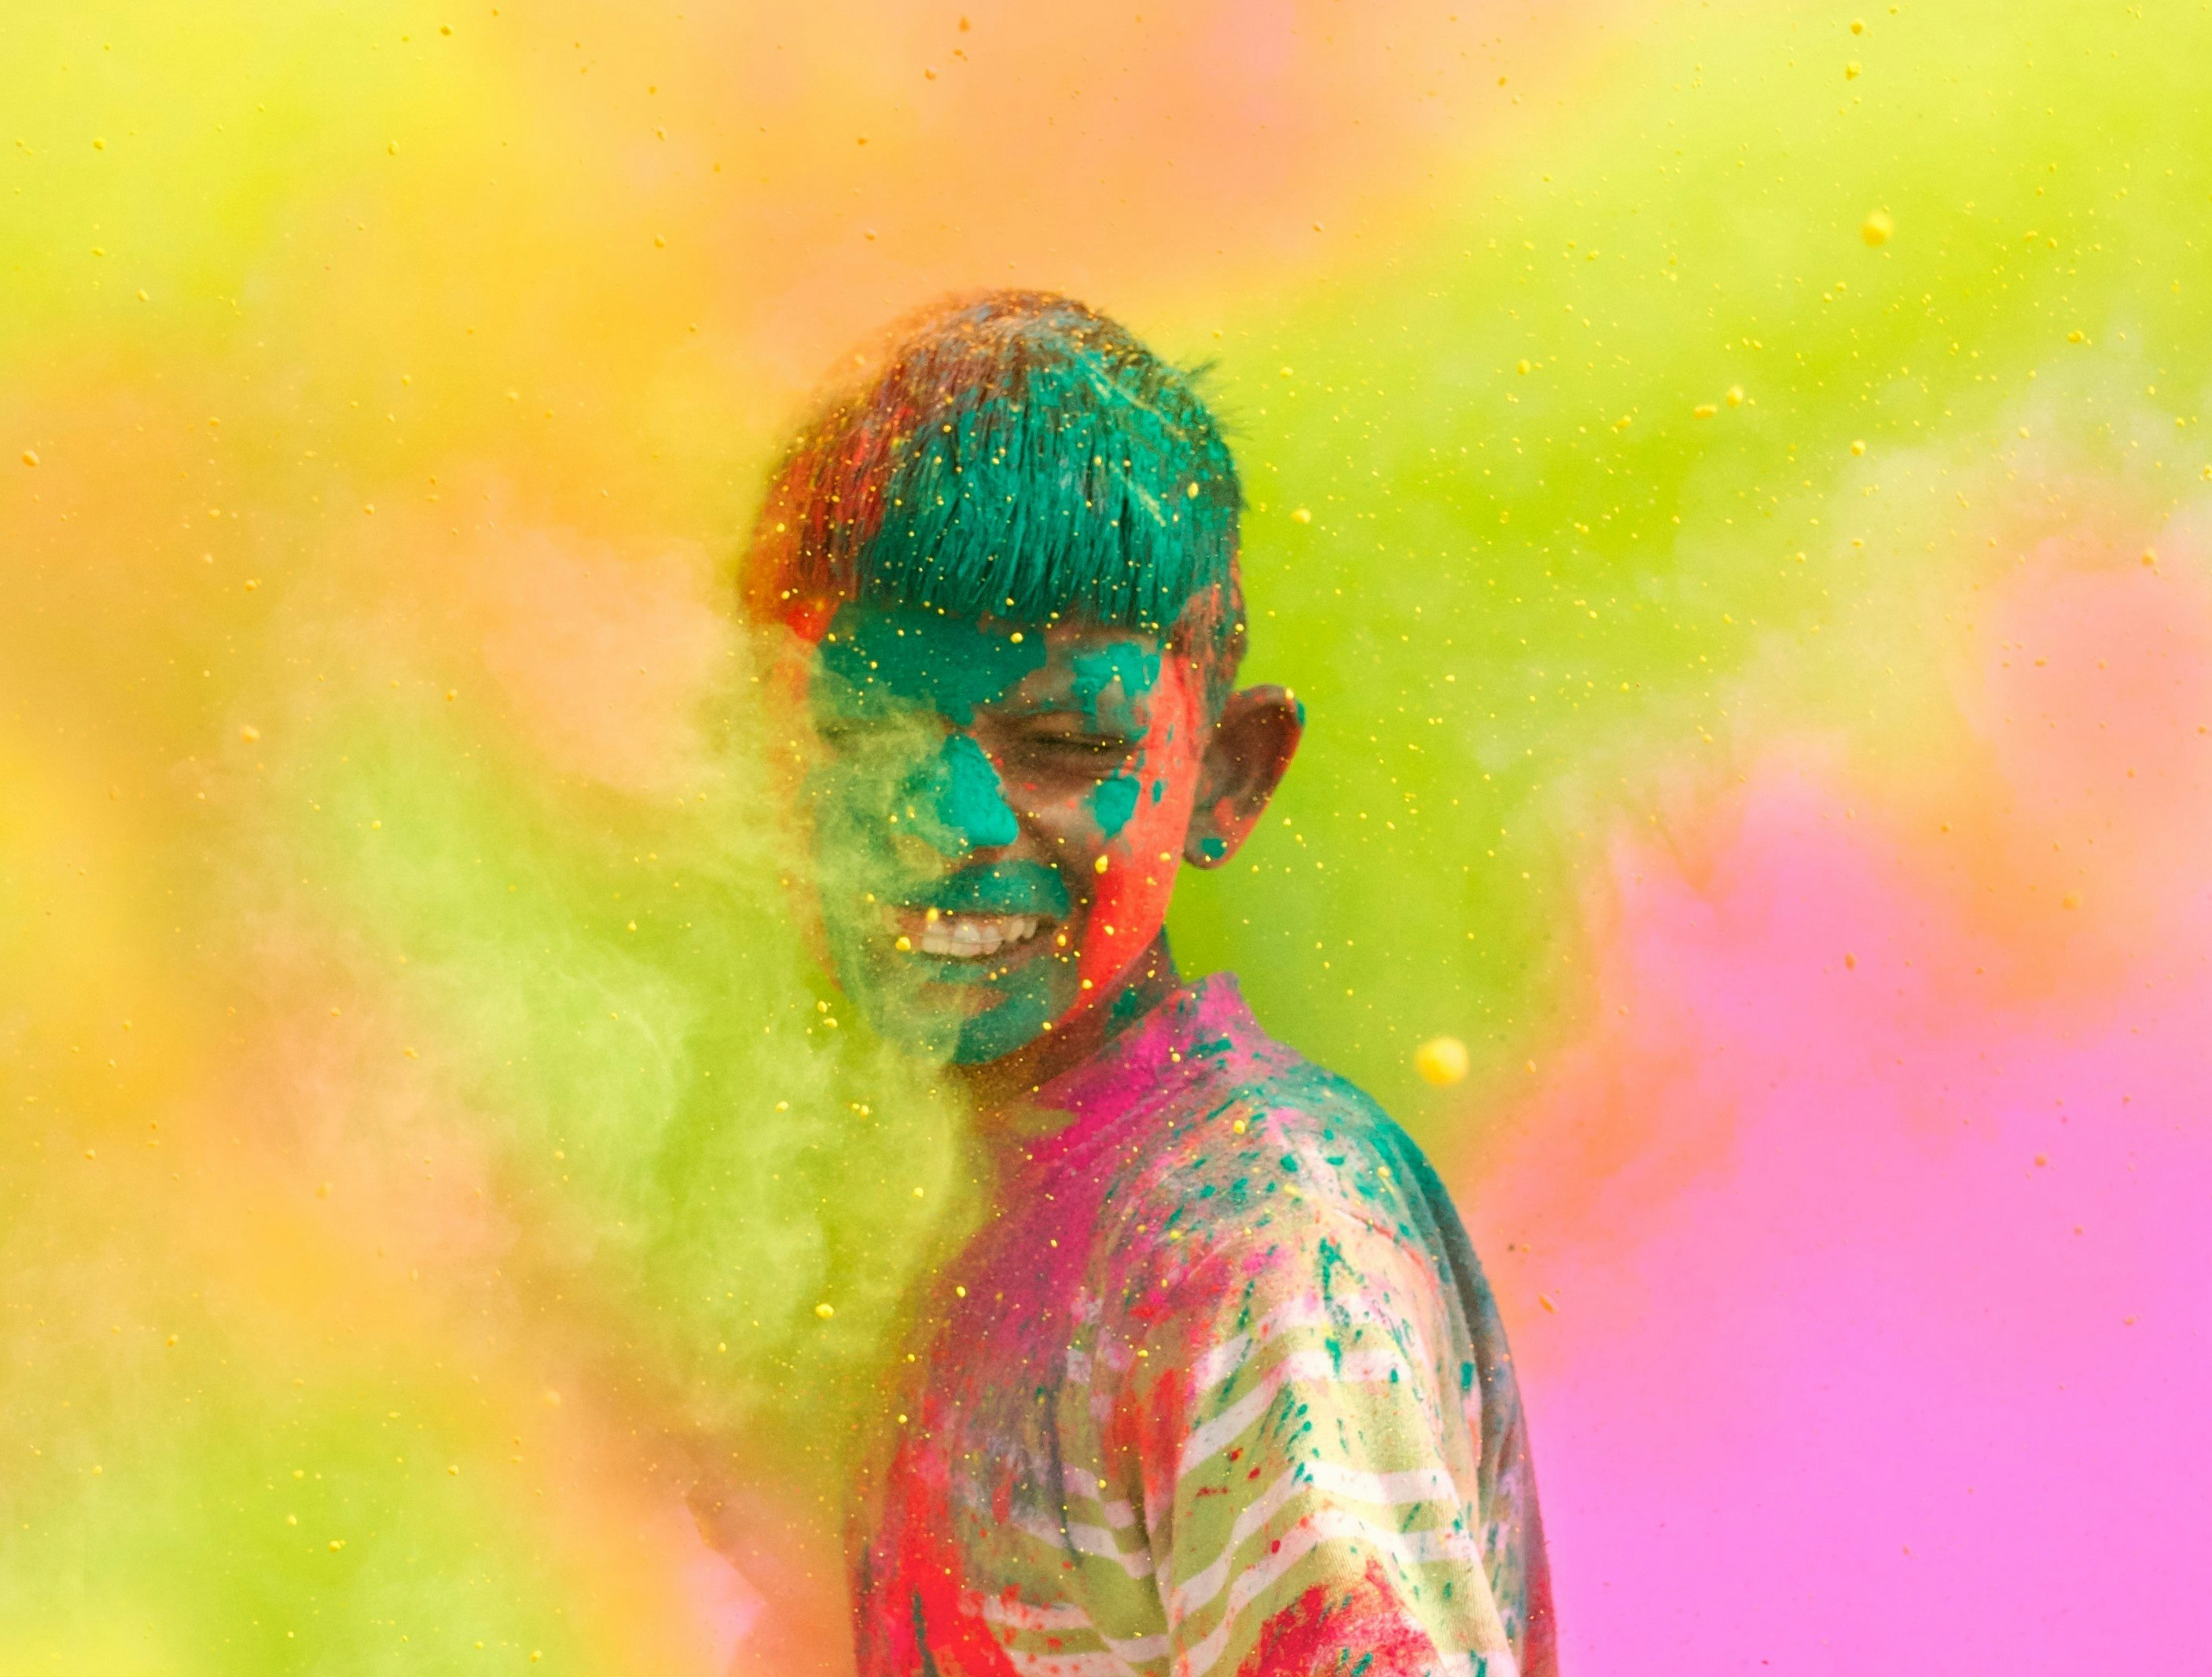 A young boy is pelted with handfuls of colourful powder, making for a colourful scene. The boy grins in the centre of the shot.